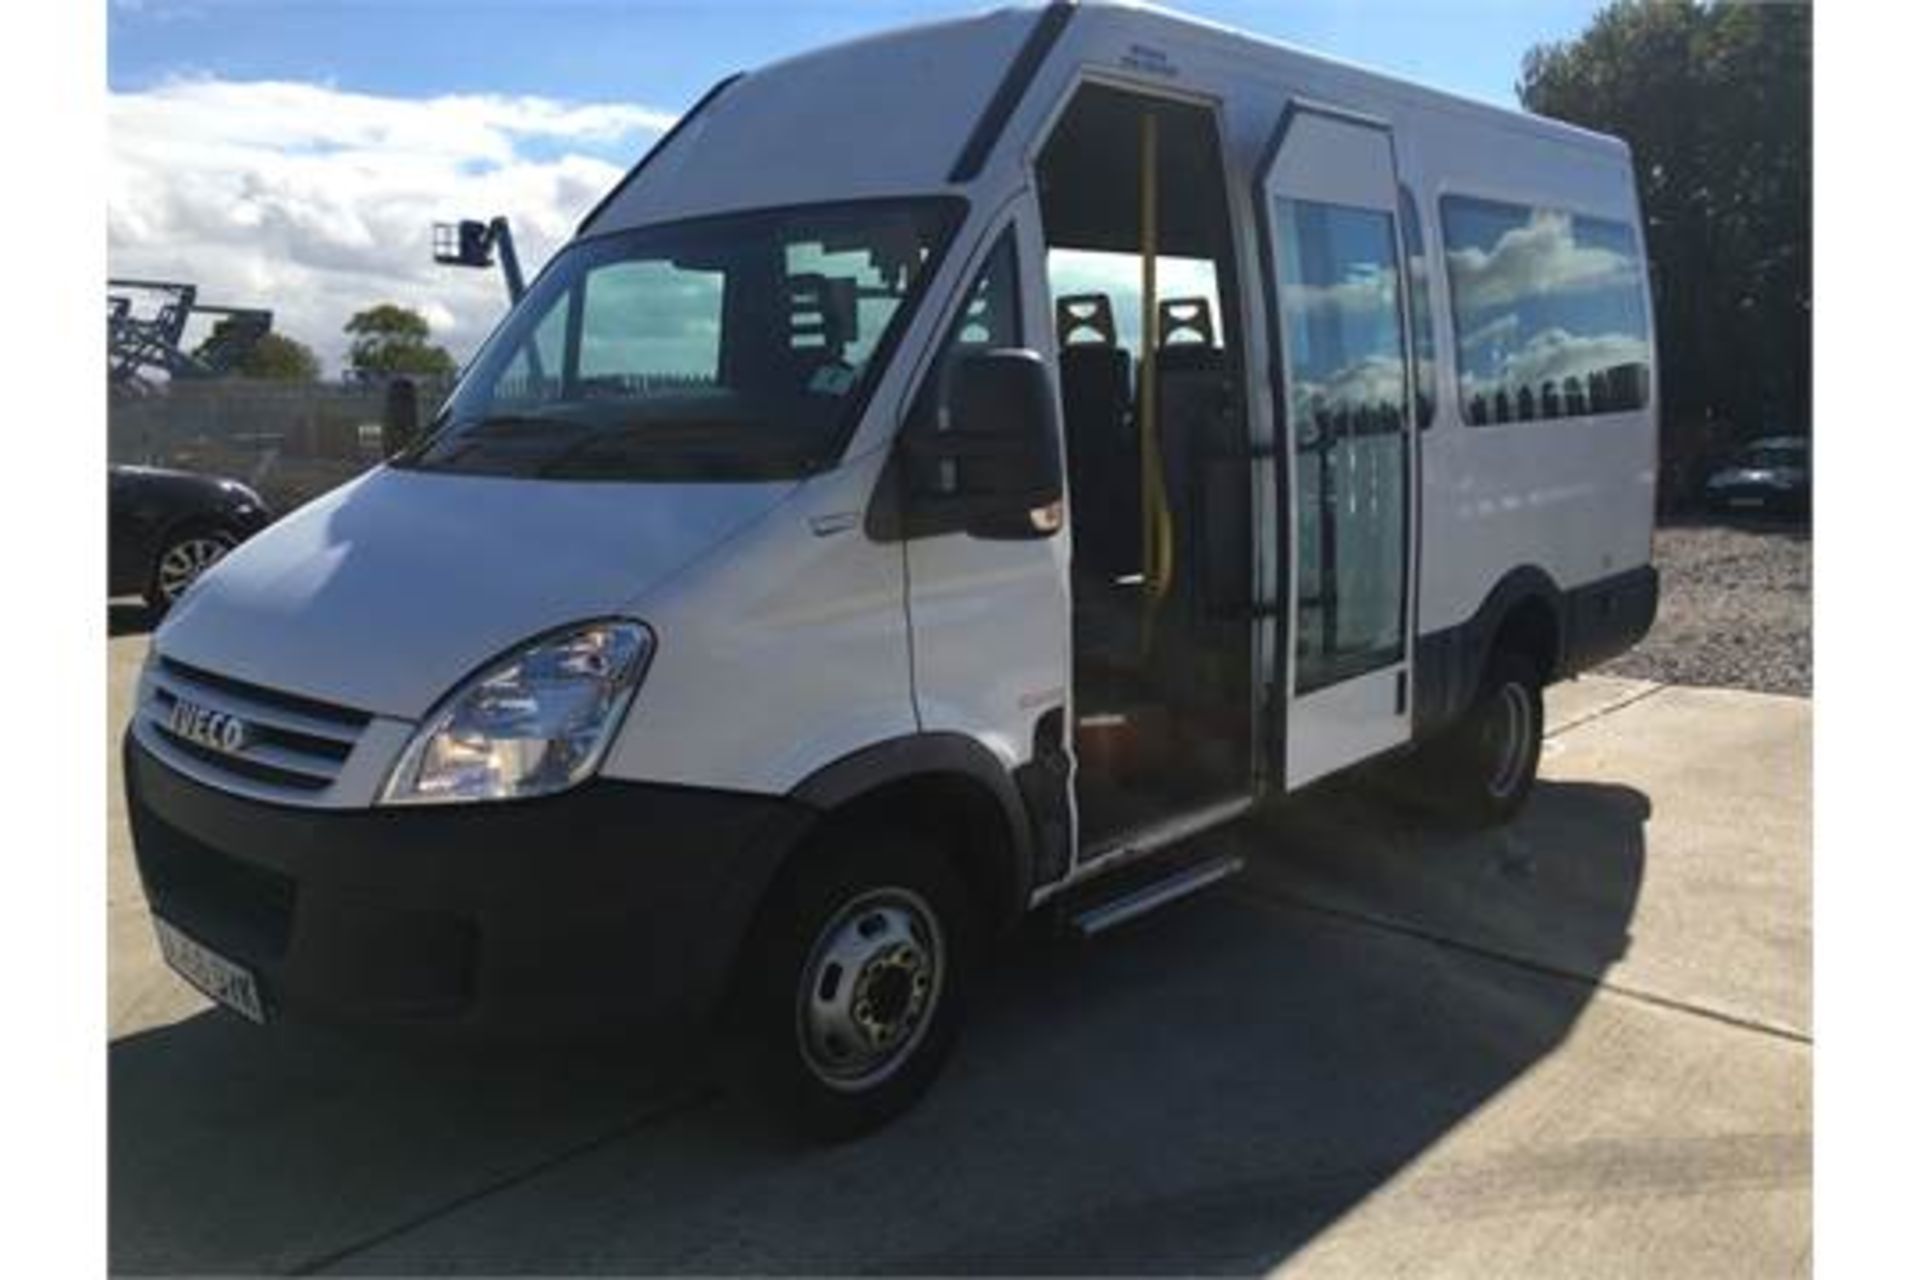 08 58 REG IVECO DAILY 40C12 DISABLED ACCESS MINIBUS WITH POWER DOOR - 2.3 TURBO DIESEL